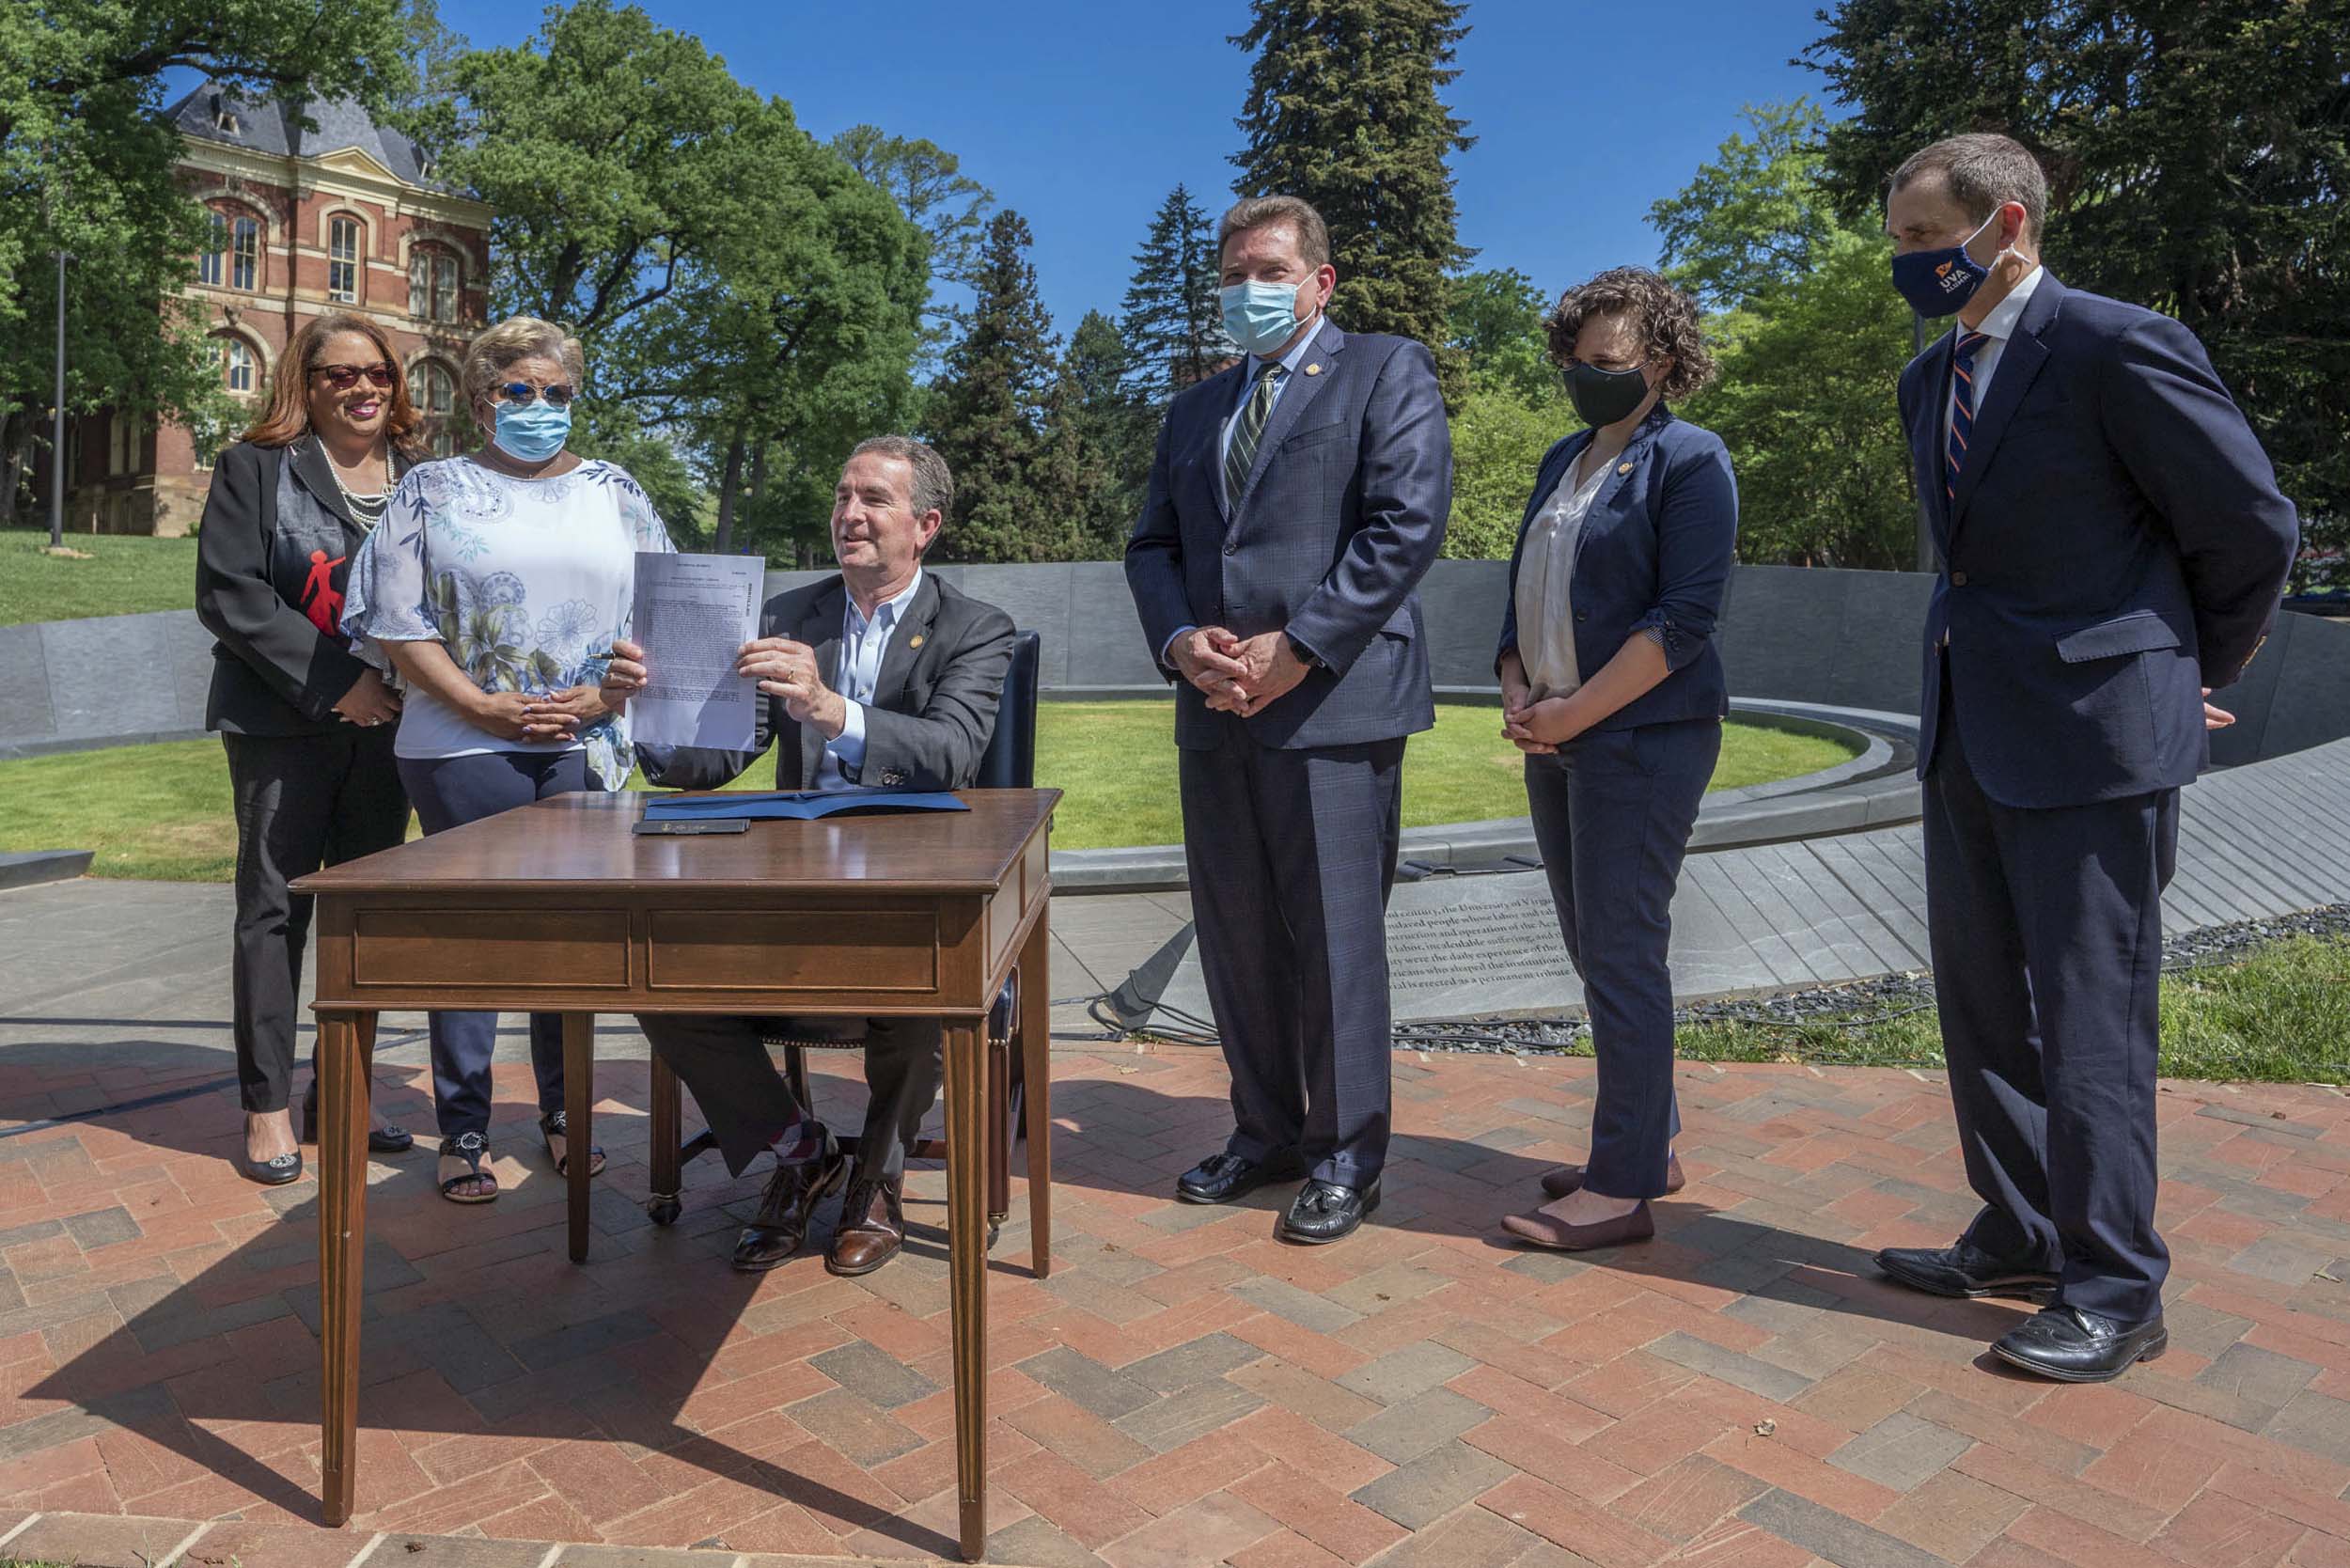 Ralph Northam sitting at a table holding up a piece of legislation at the Memorial for Enslaved Laborers while being surrounding by UVA members.